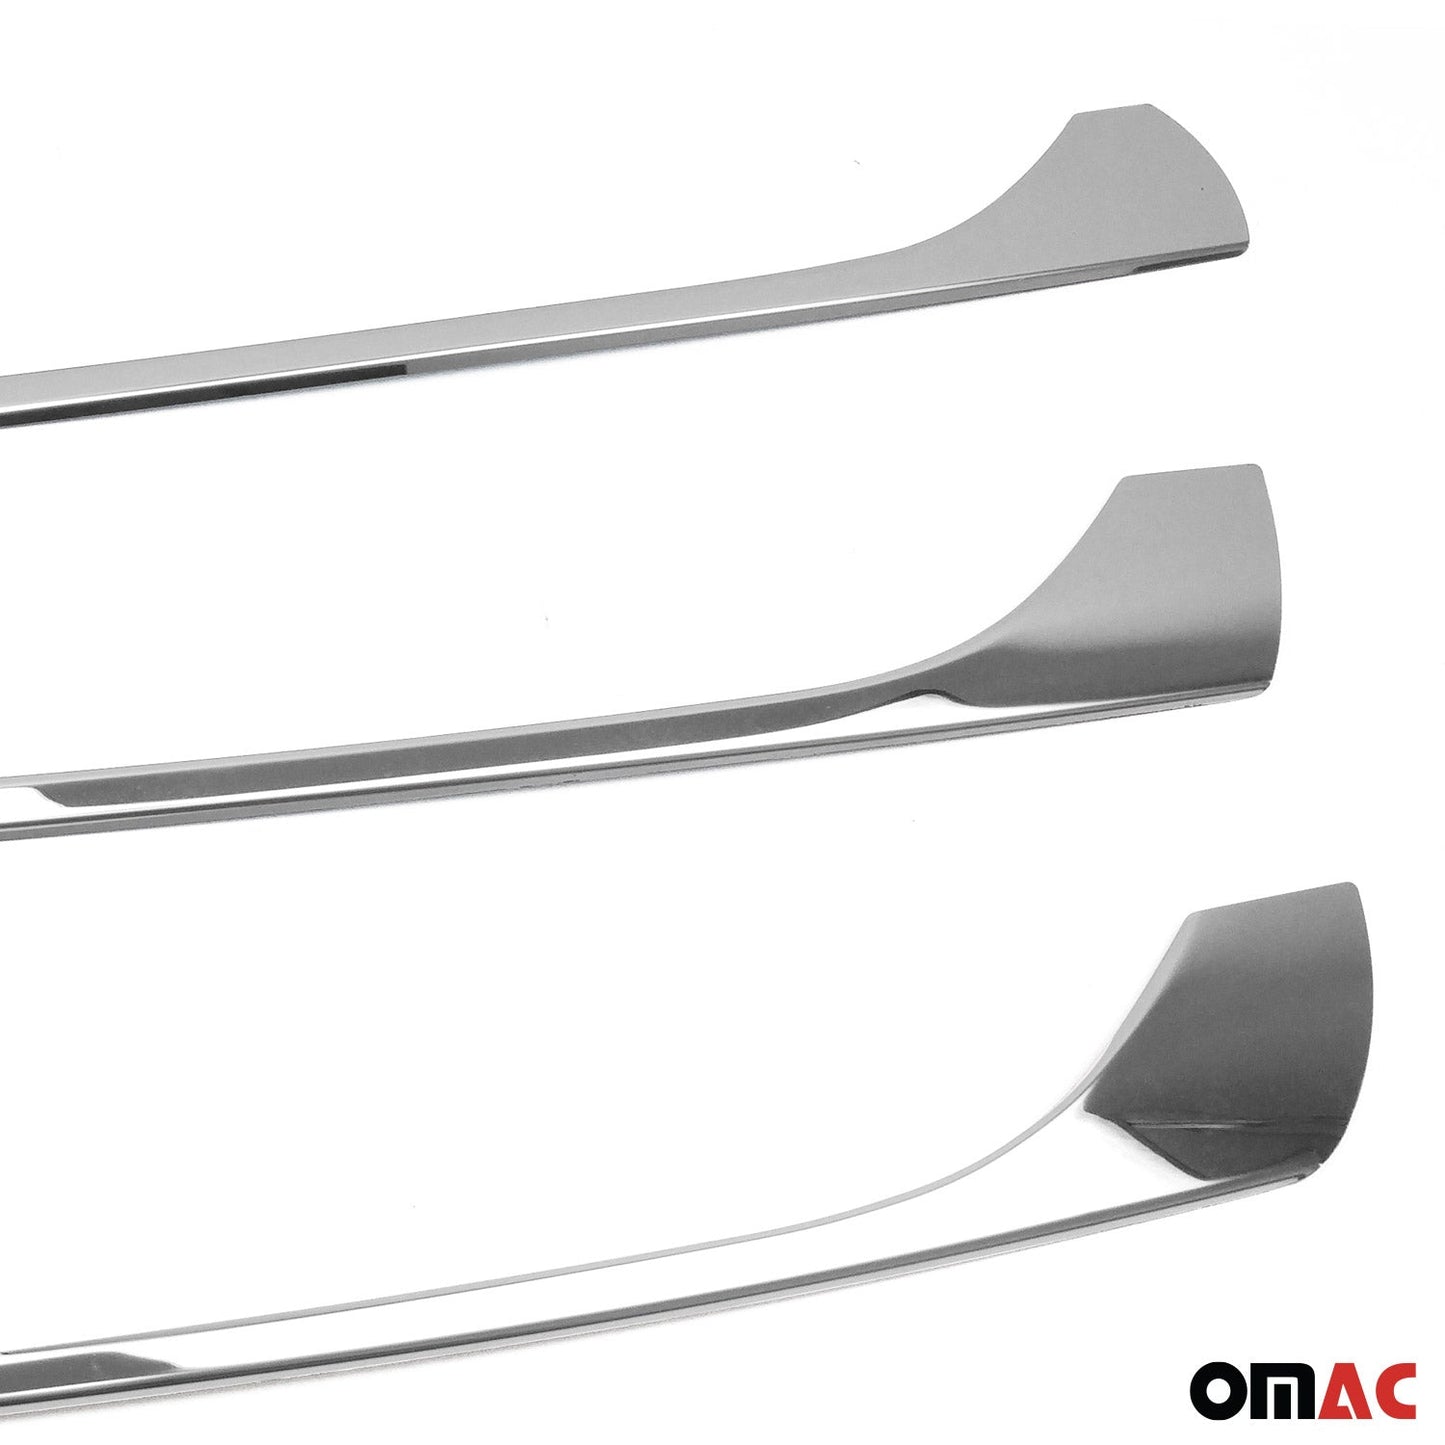 OMAC For Mercedes Metris 2016-2020 Pre Facelift Chrome Front Grill Trim Cover Steel 4733081